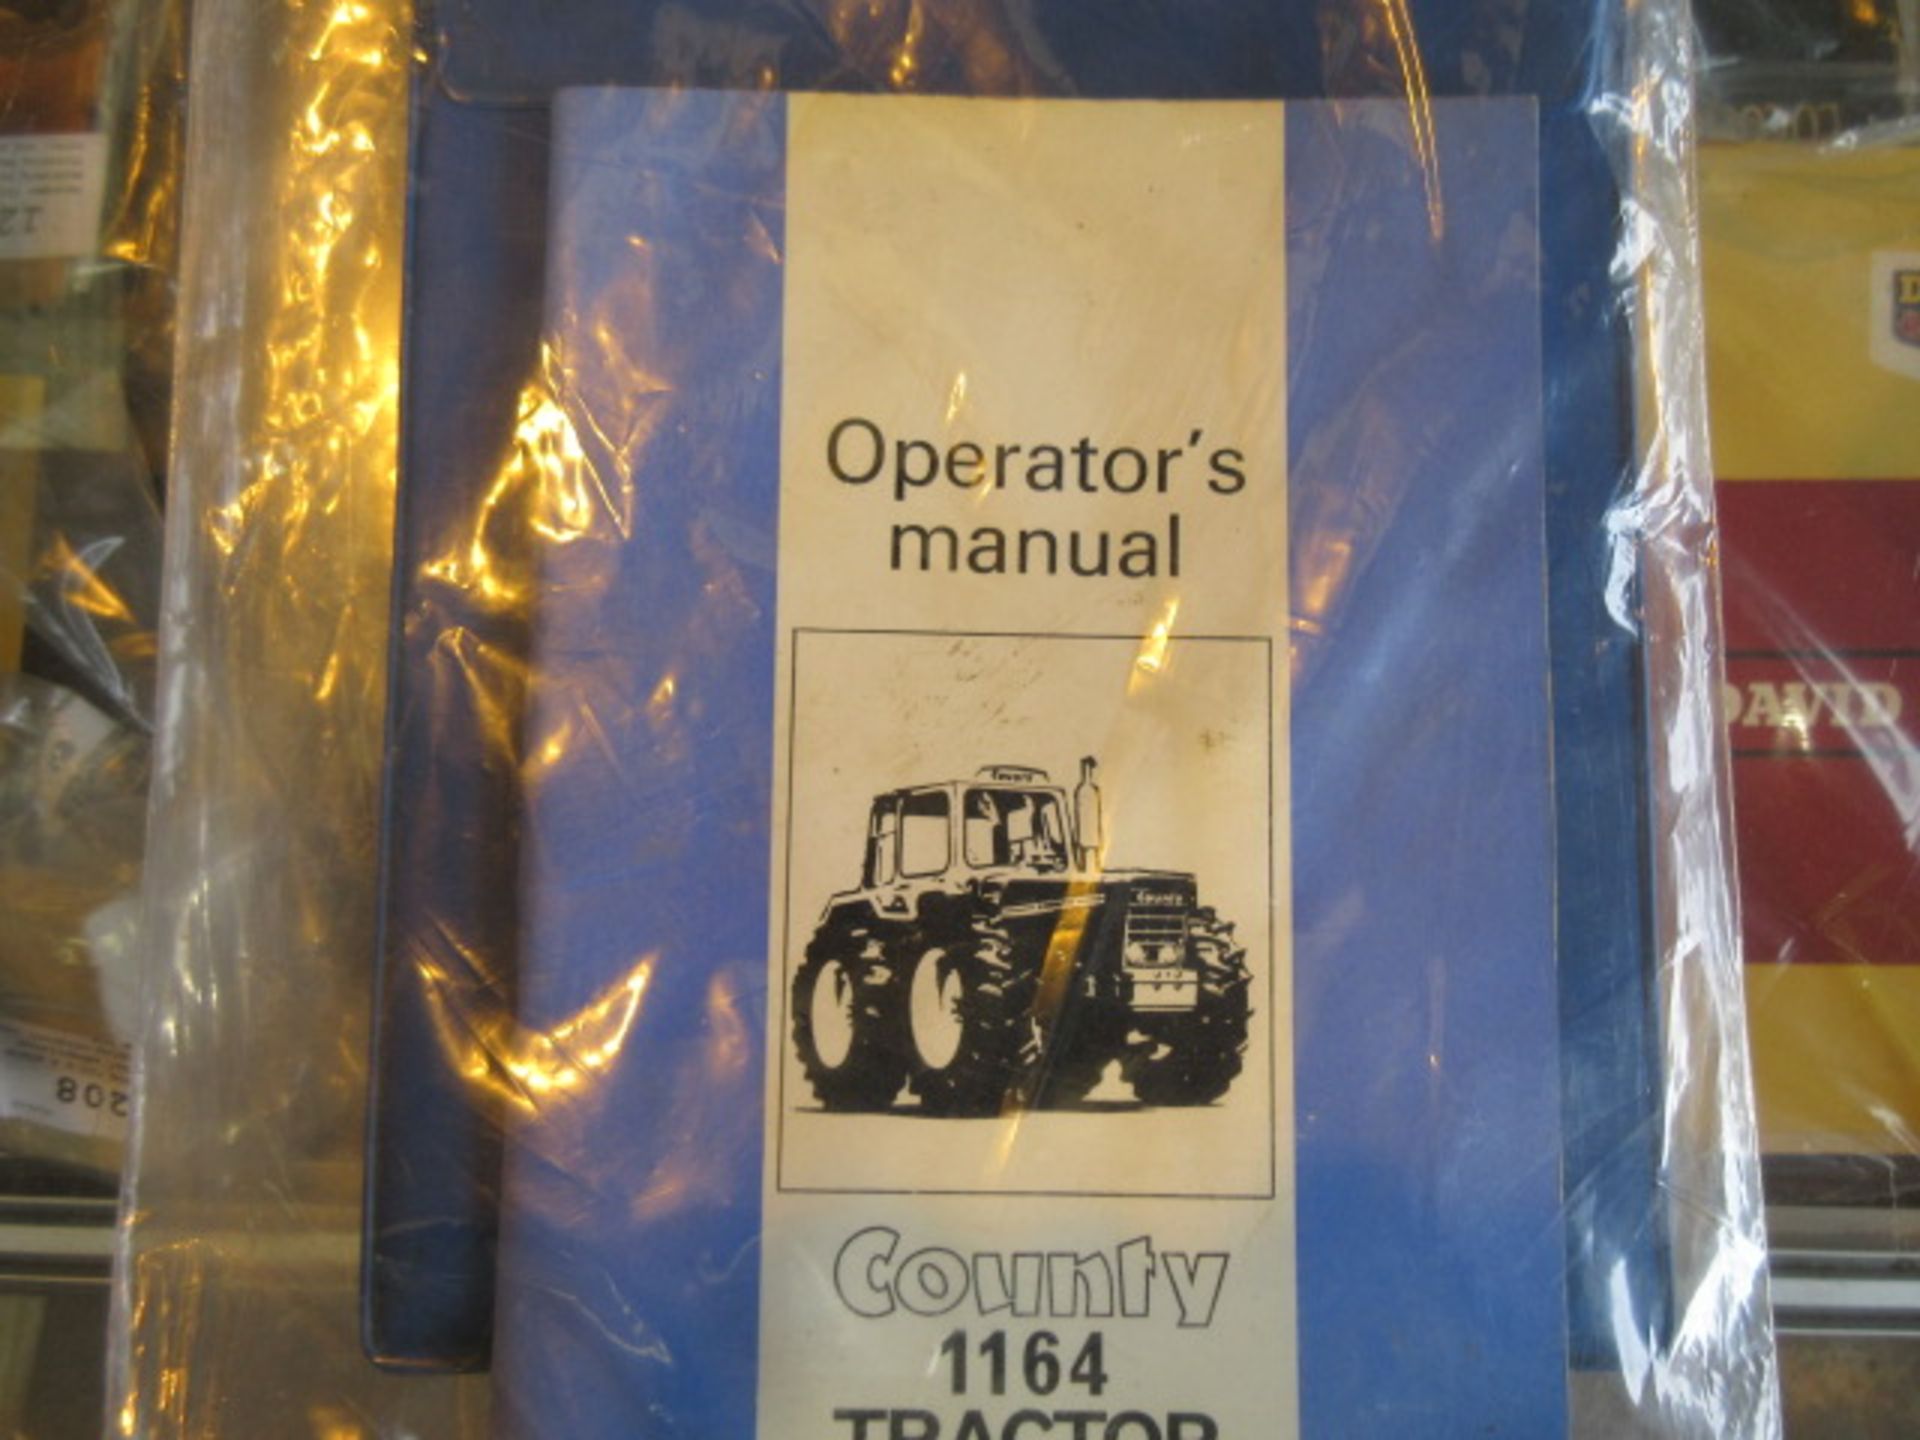 County 1164 owners manual with original County protective wallet